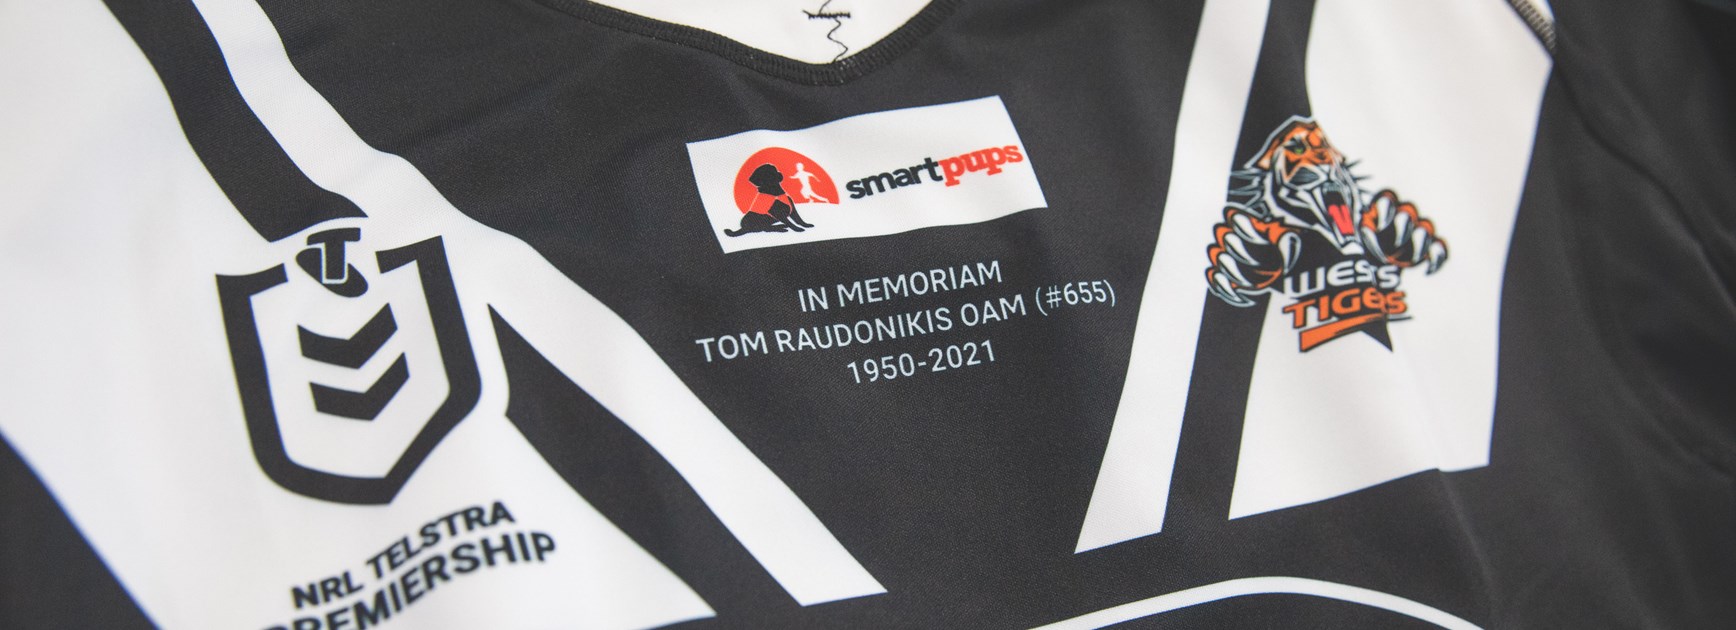 Tommy Raudonikis OAM Memorial jersey auction underway!